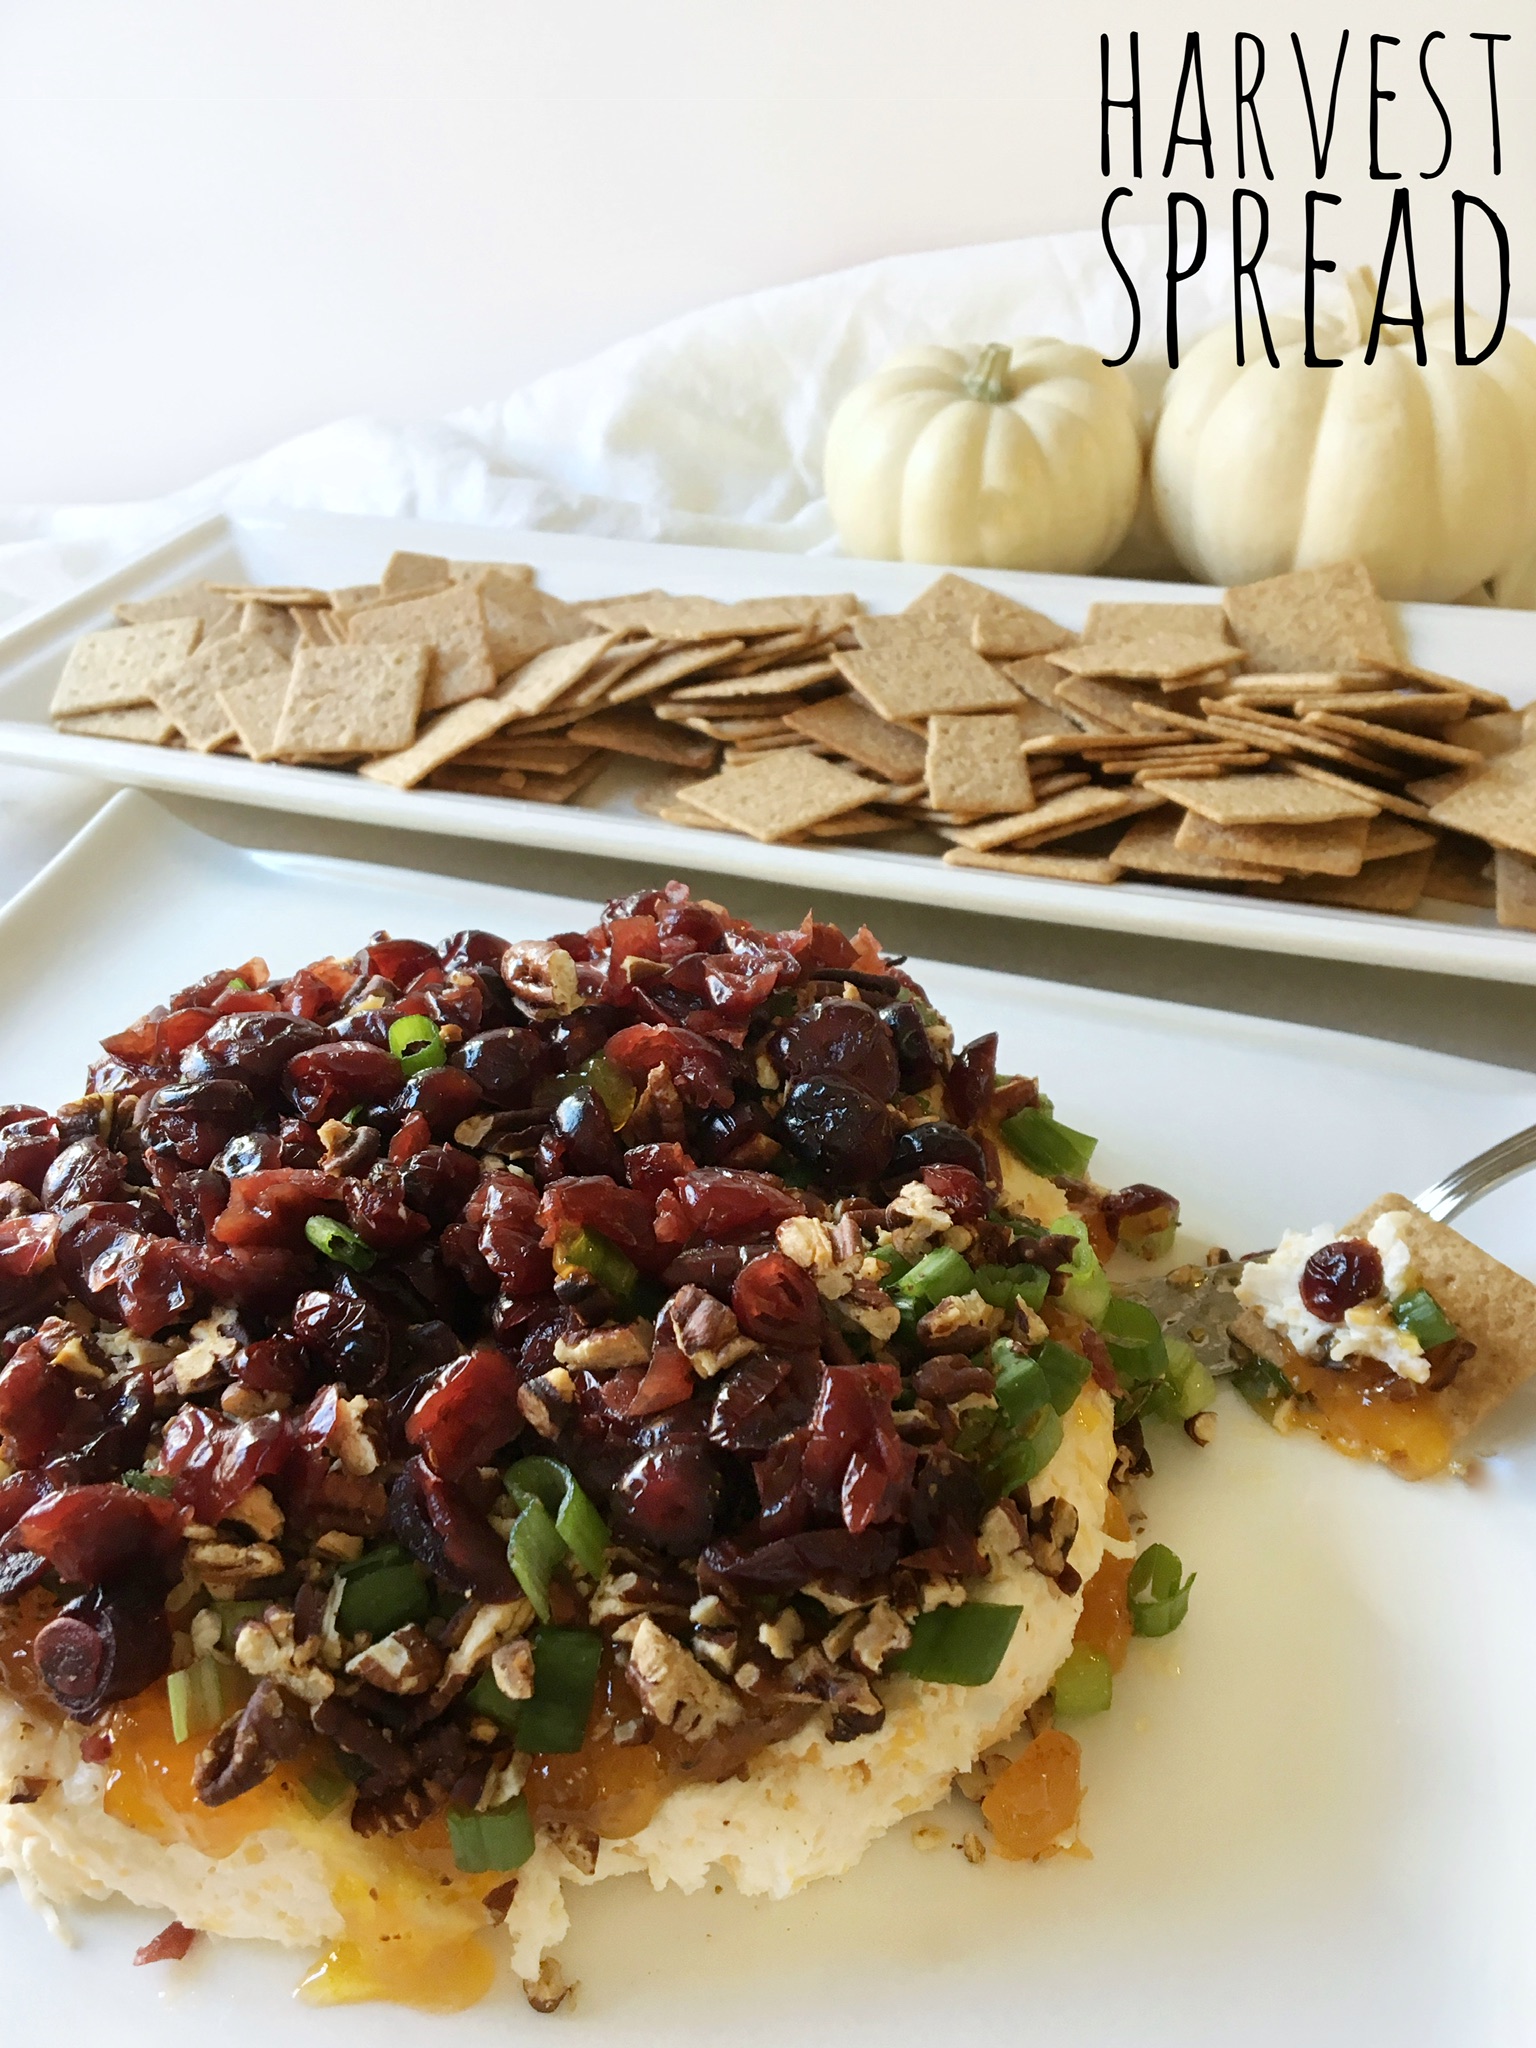 A harvest blend of cheeses, nuts and cranberries to serve with crackers